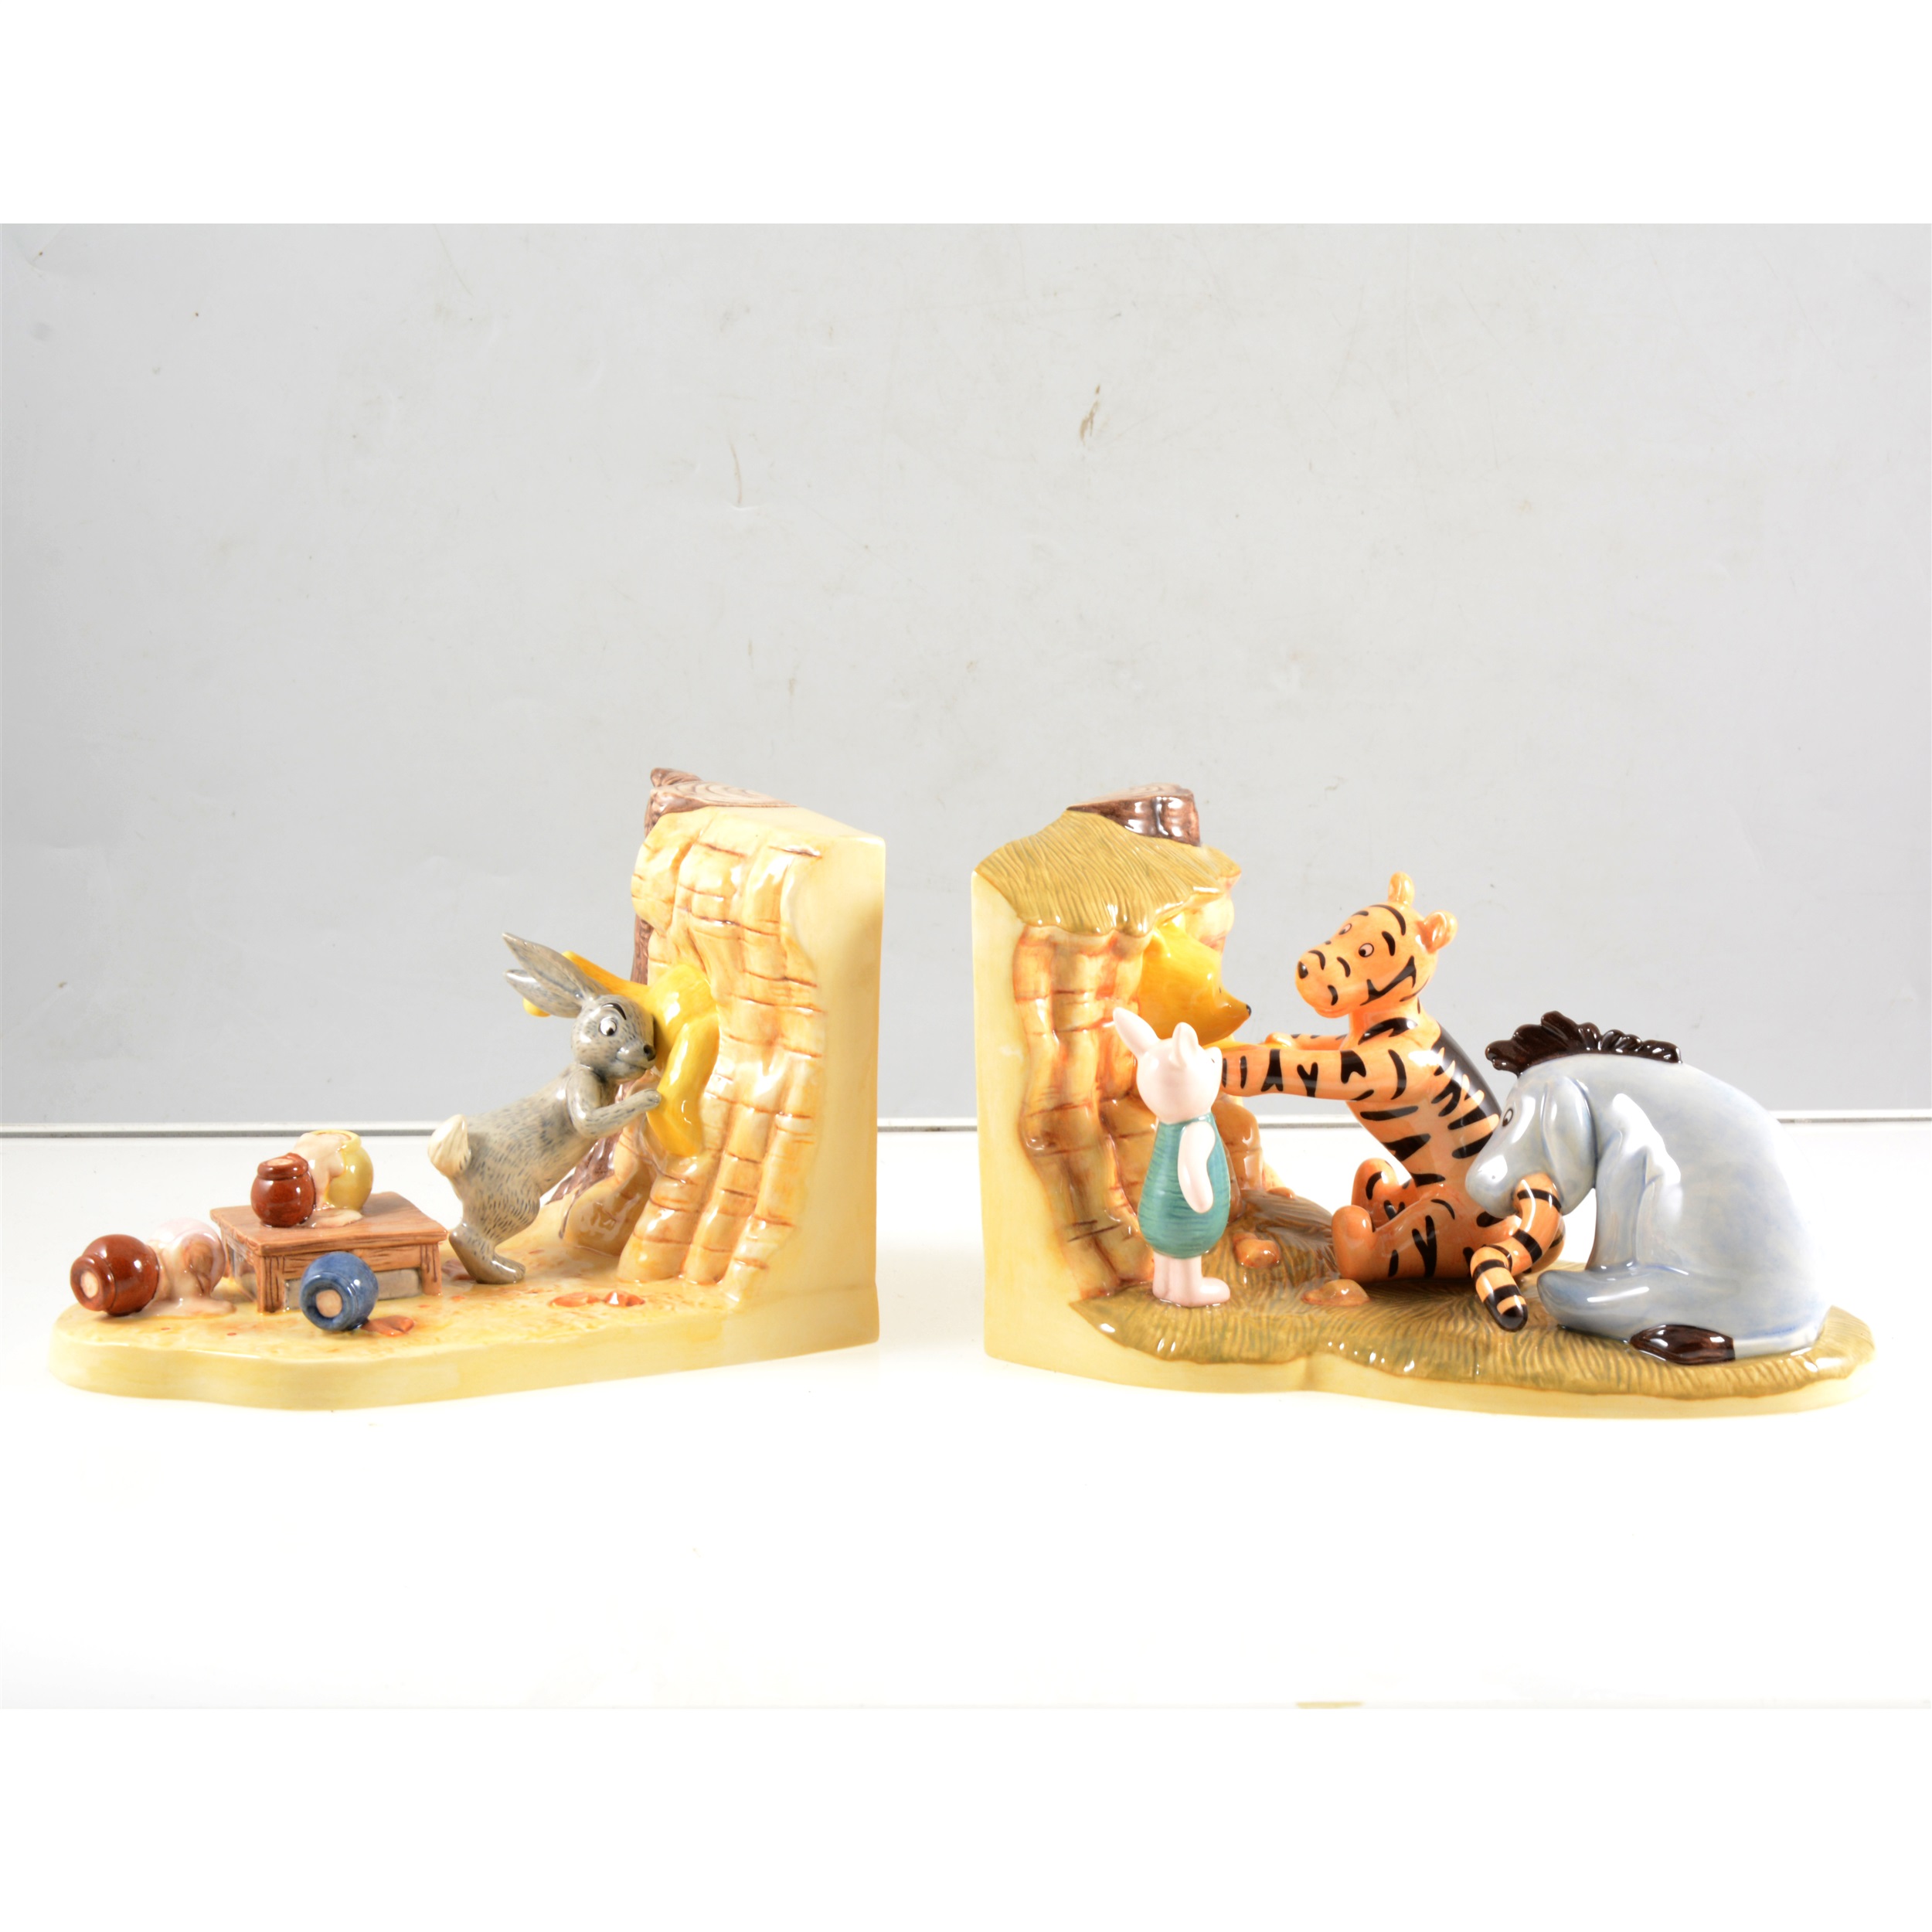 Royal Doulton Bunnykins 'The Tudor Collection', and limited edition Winnie the Pooh bookends. - Image 2 of 2